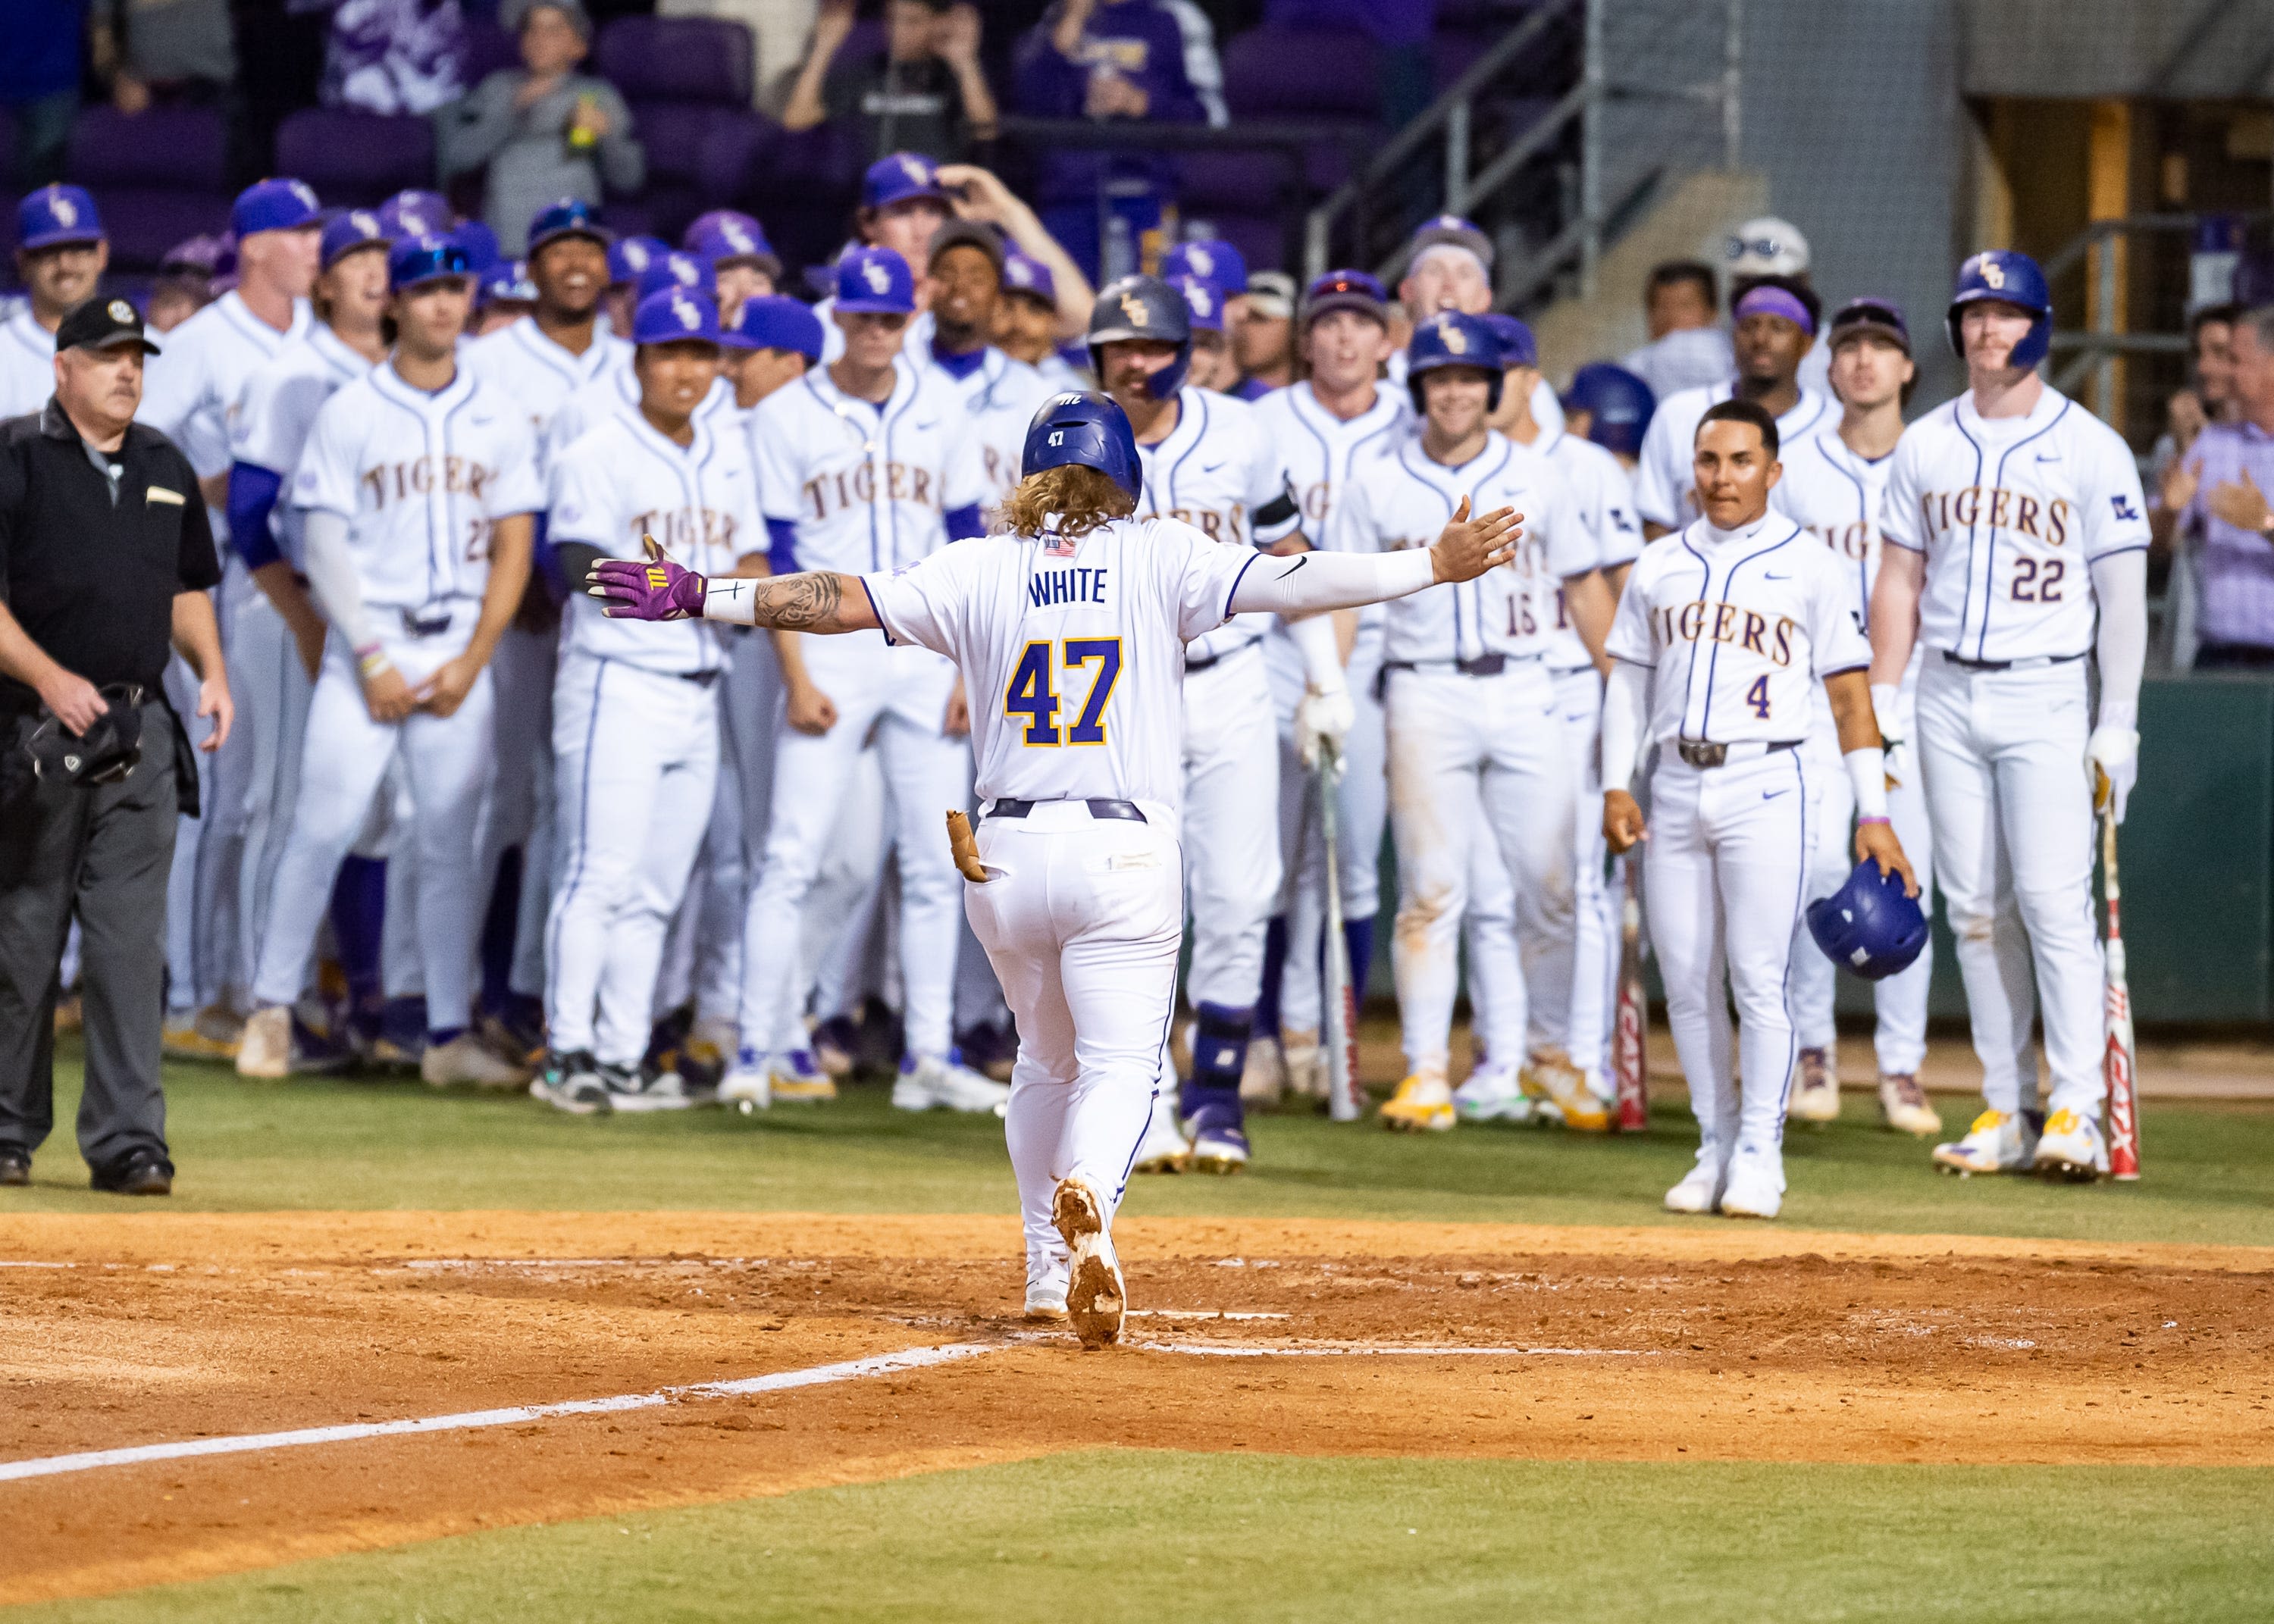 LSU baseball lands one of top remaining transfer portal players in this West Coast pitcher